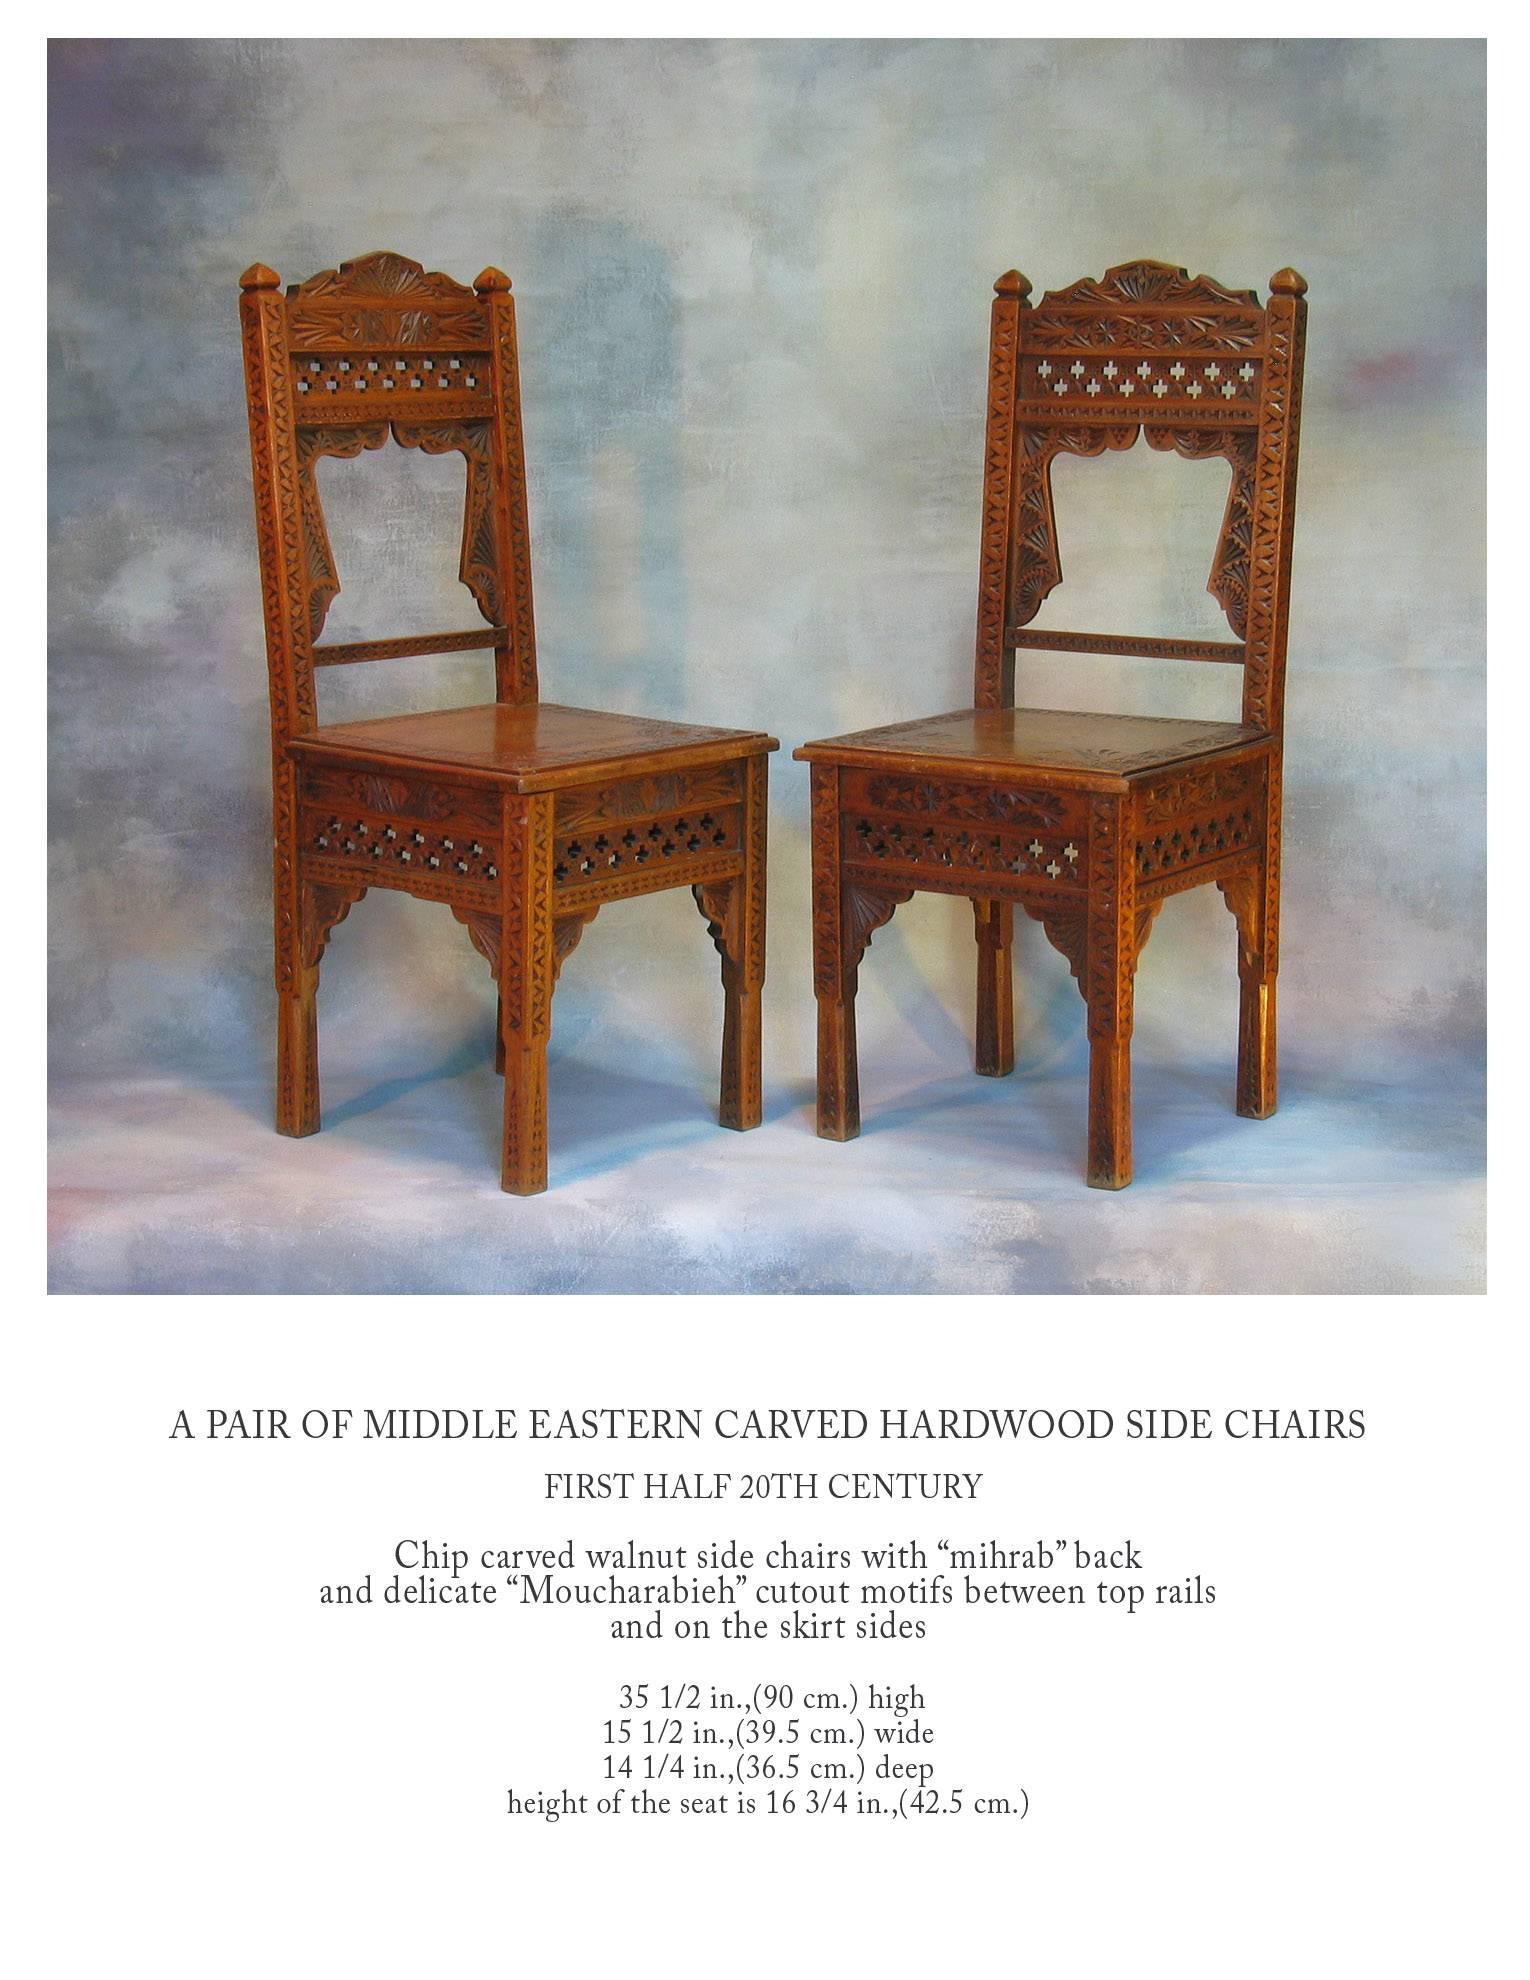 A pair of middle eastern carved hardwood side chairs, first half of the 20th century, chip carved walnut side chairs with 